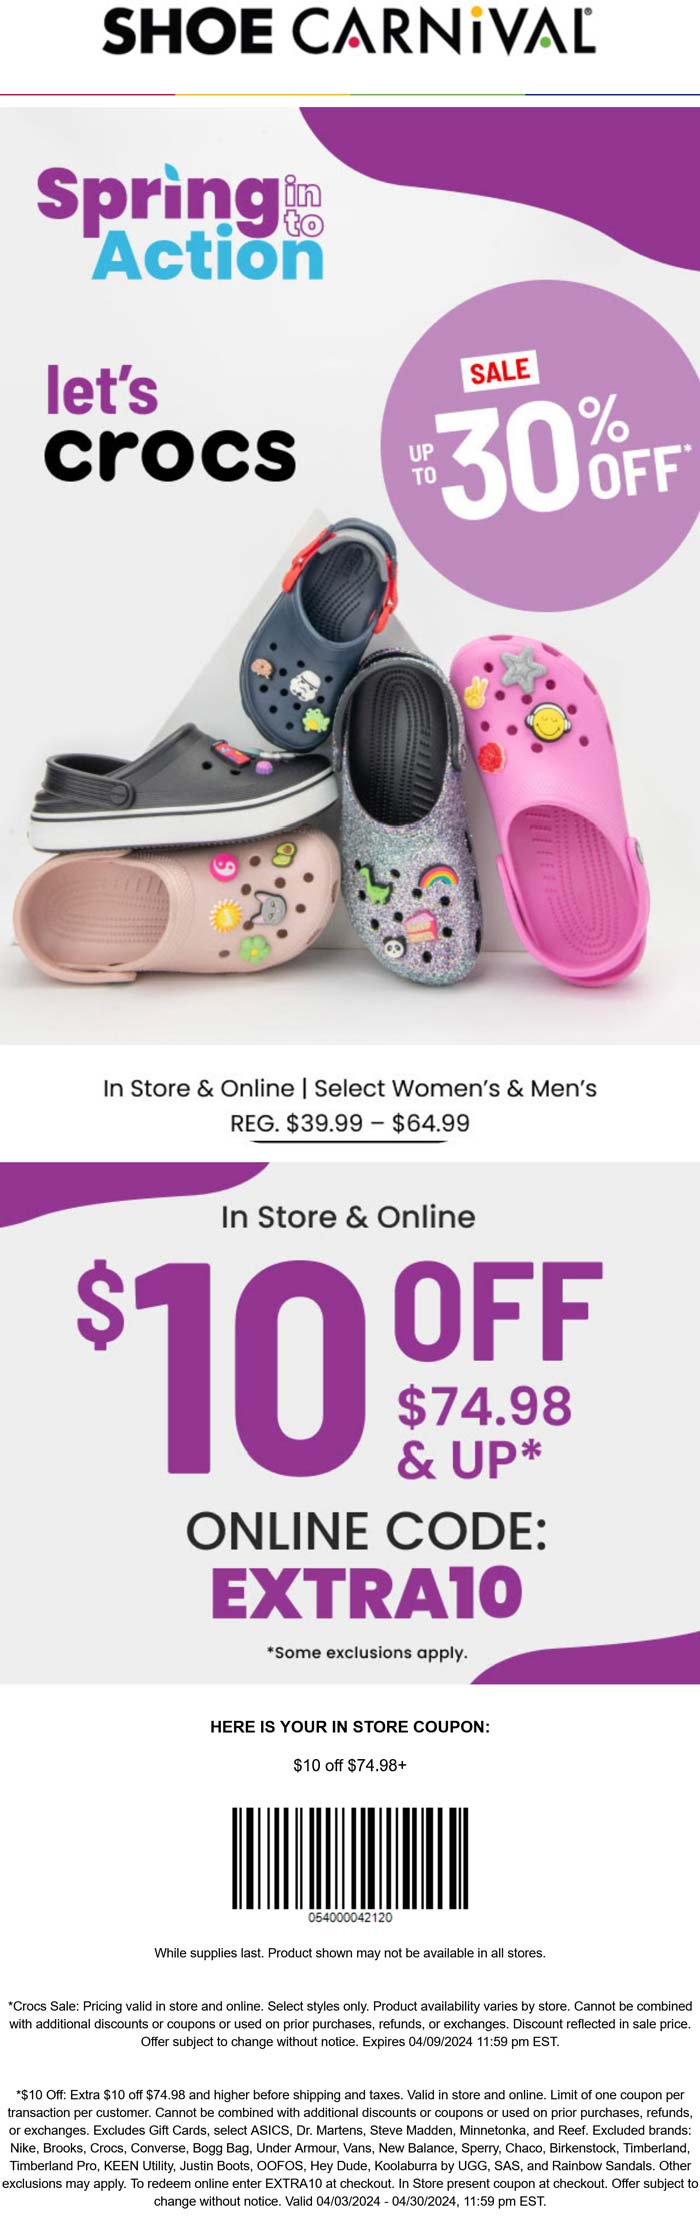 Shoe Carnival stores Coupon  $10 off $75 at Shoe Carnival, or online via promo code EXTRA10 #shoecarnival 